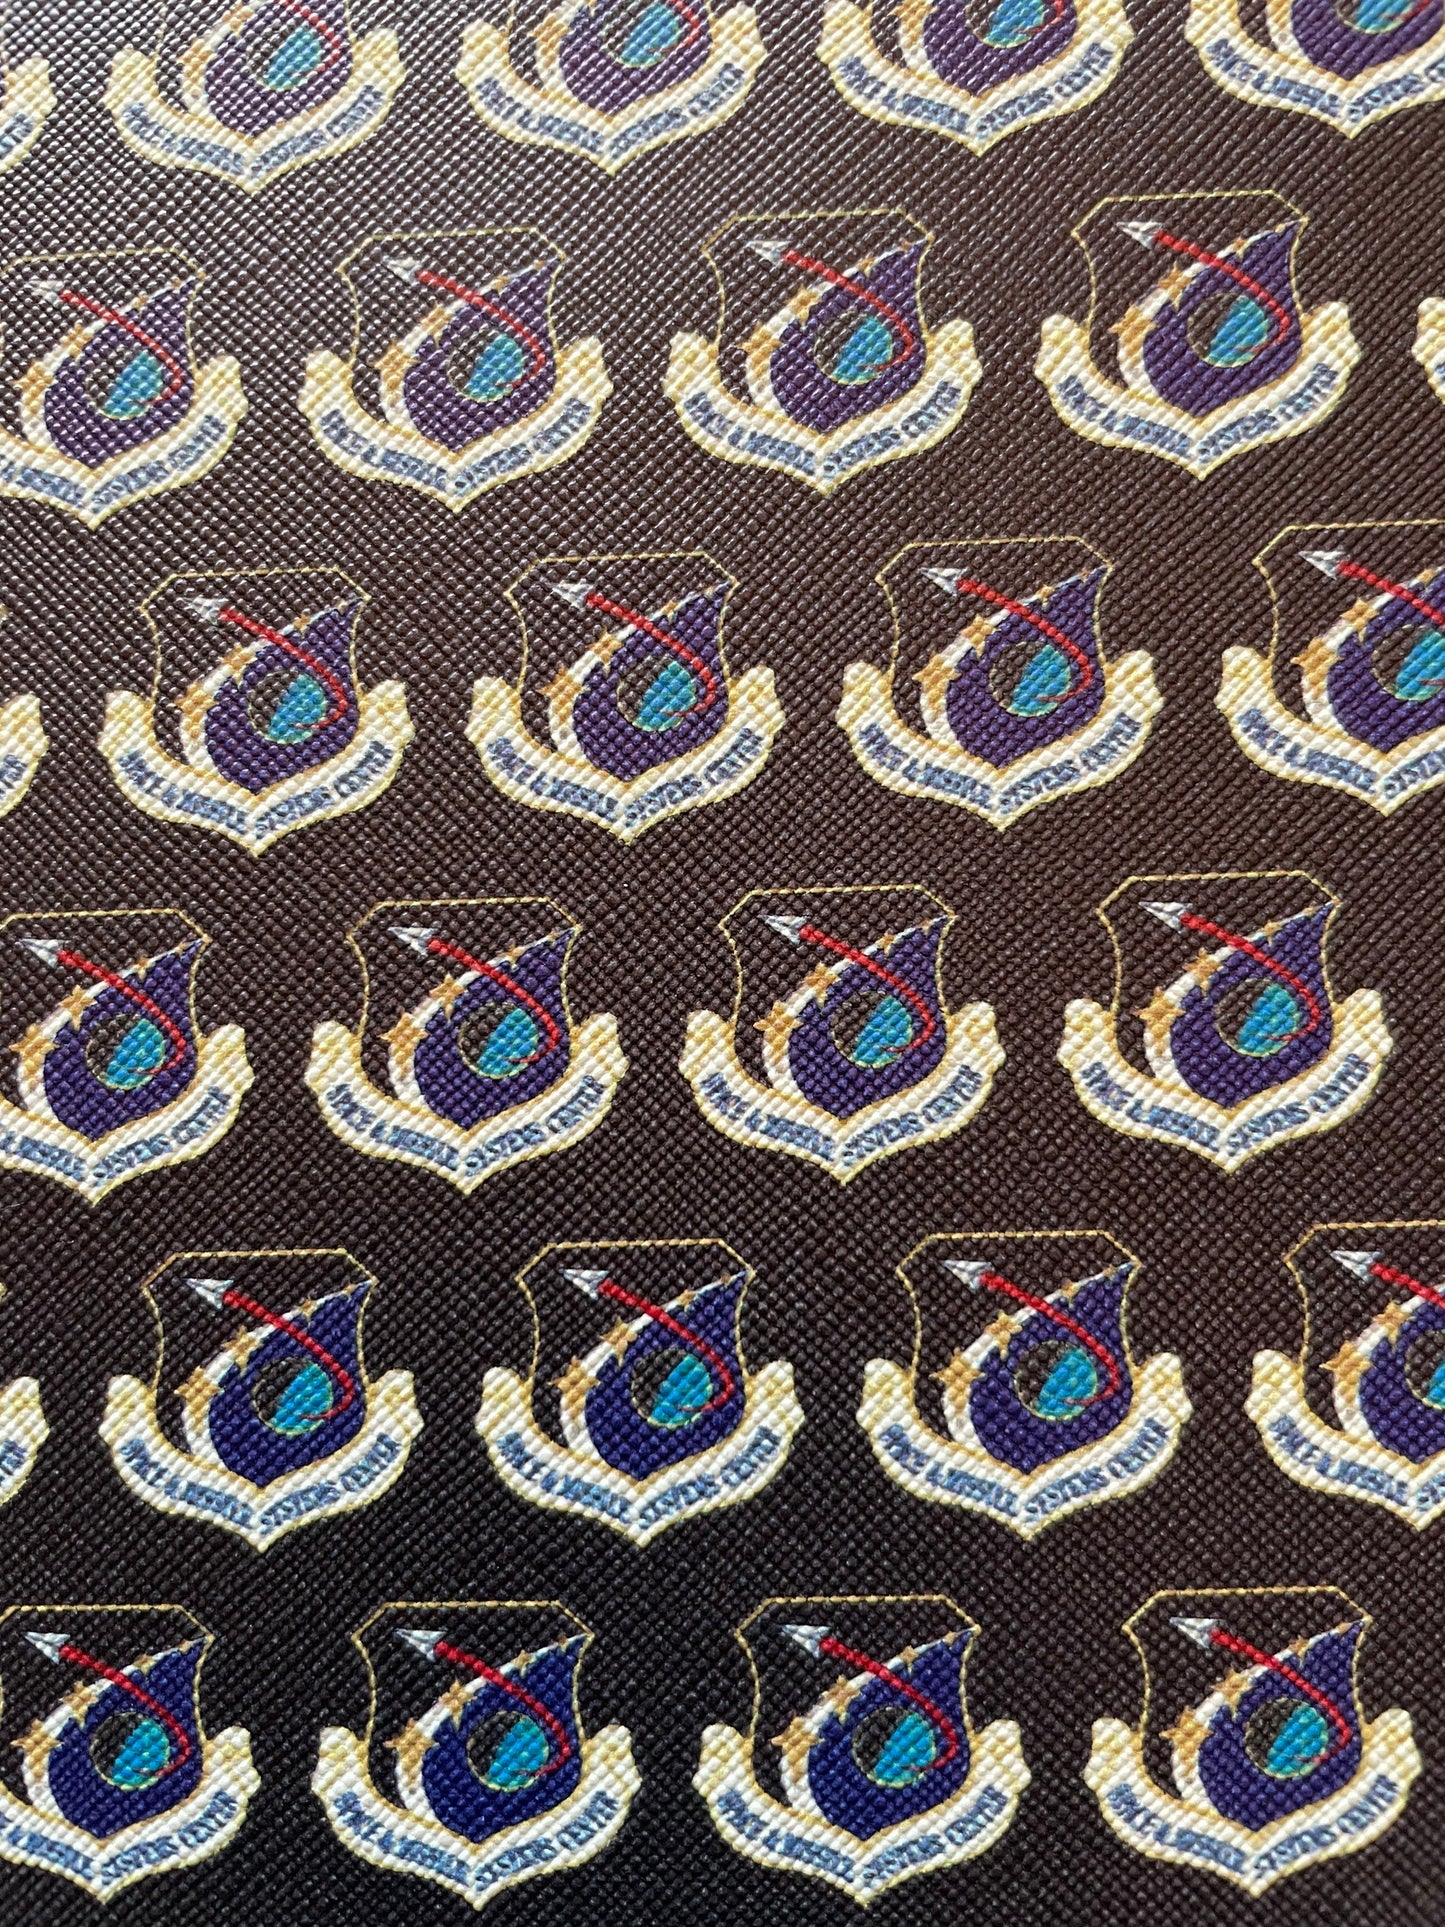 Space and Missile Systems faux leather sheets great for bows and earrings TheFabricDude